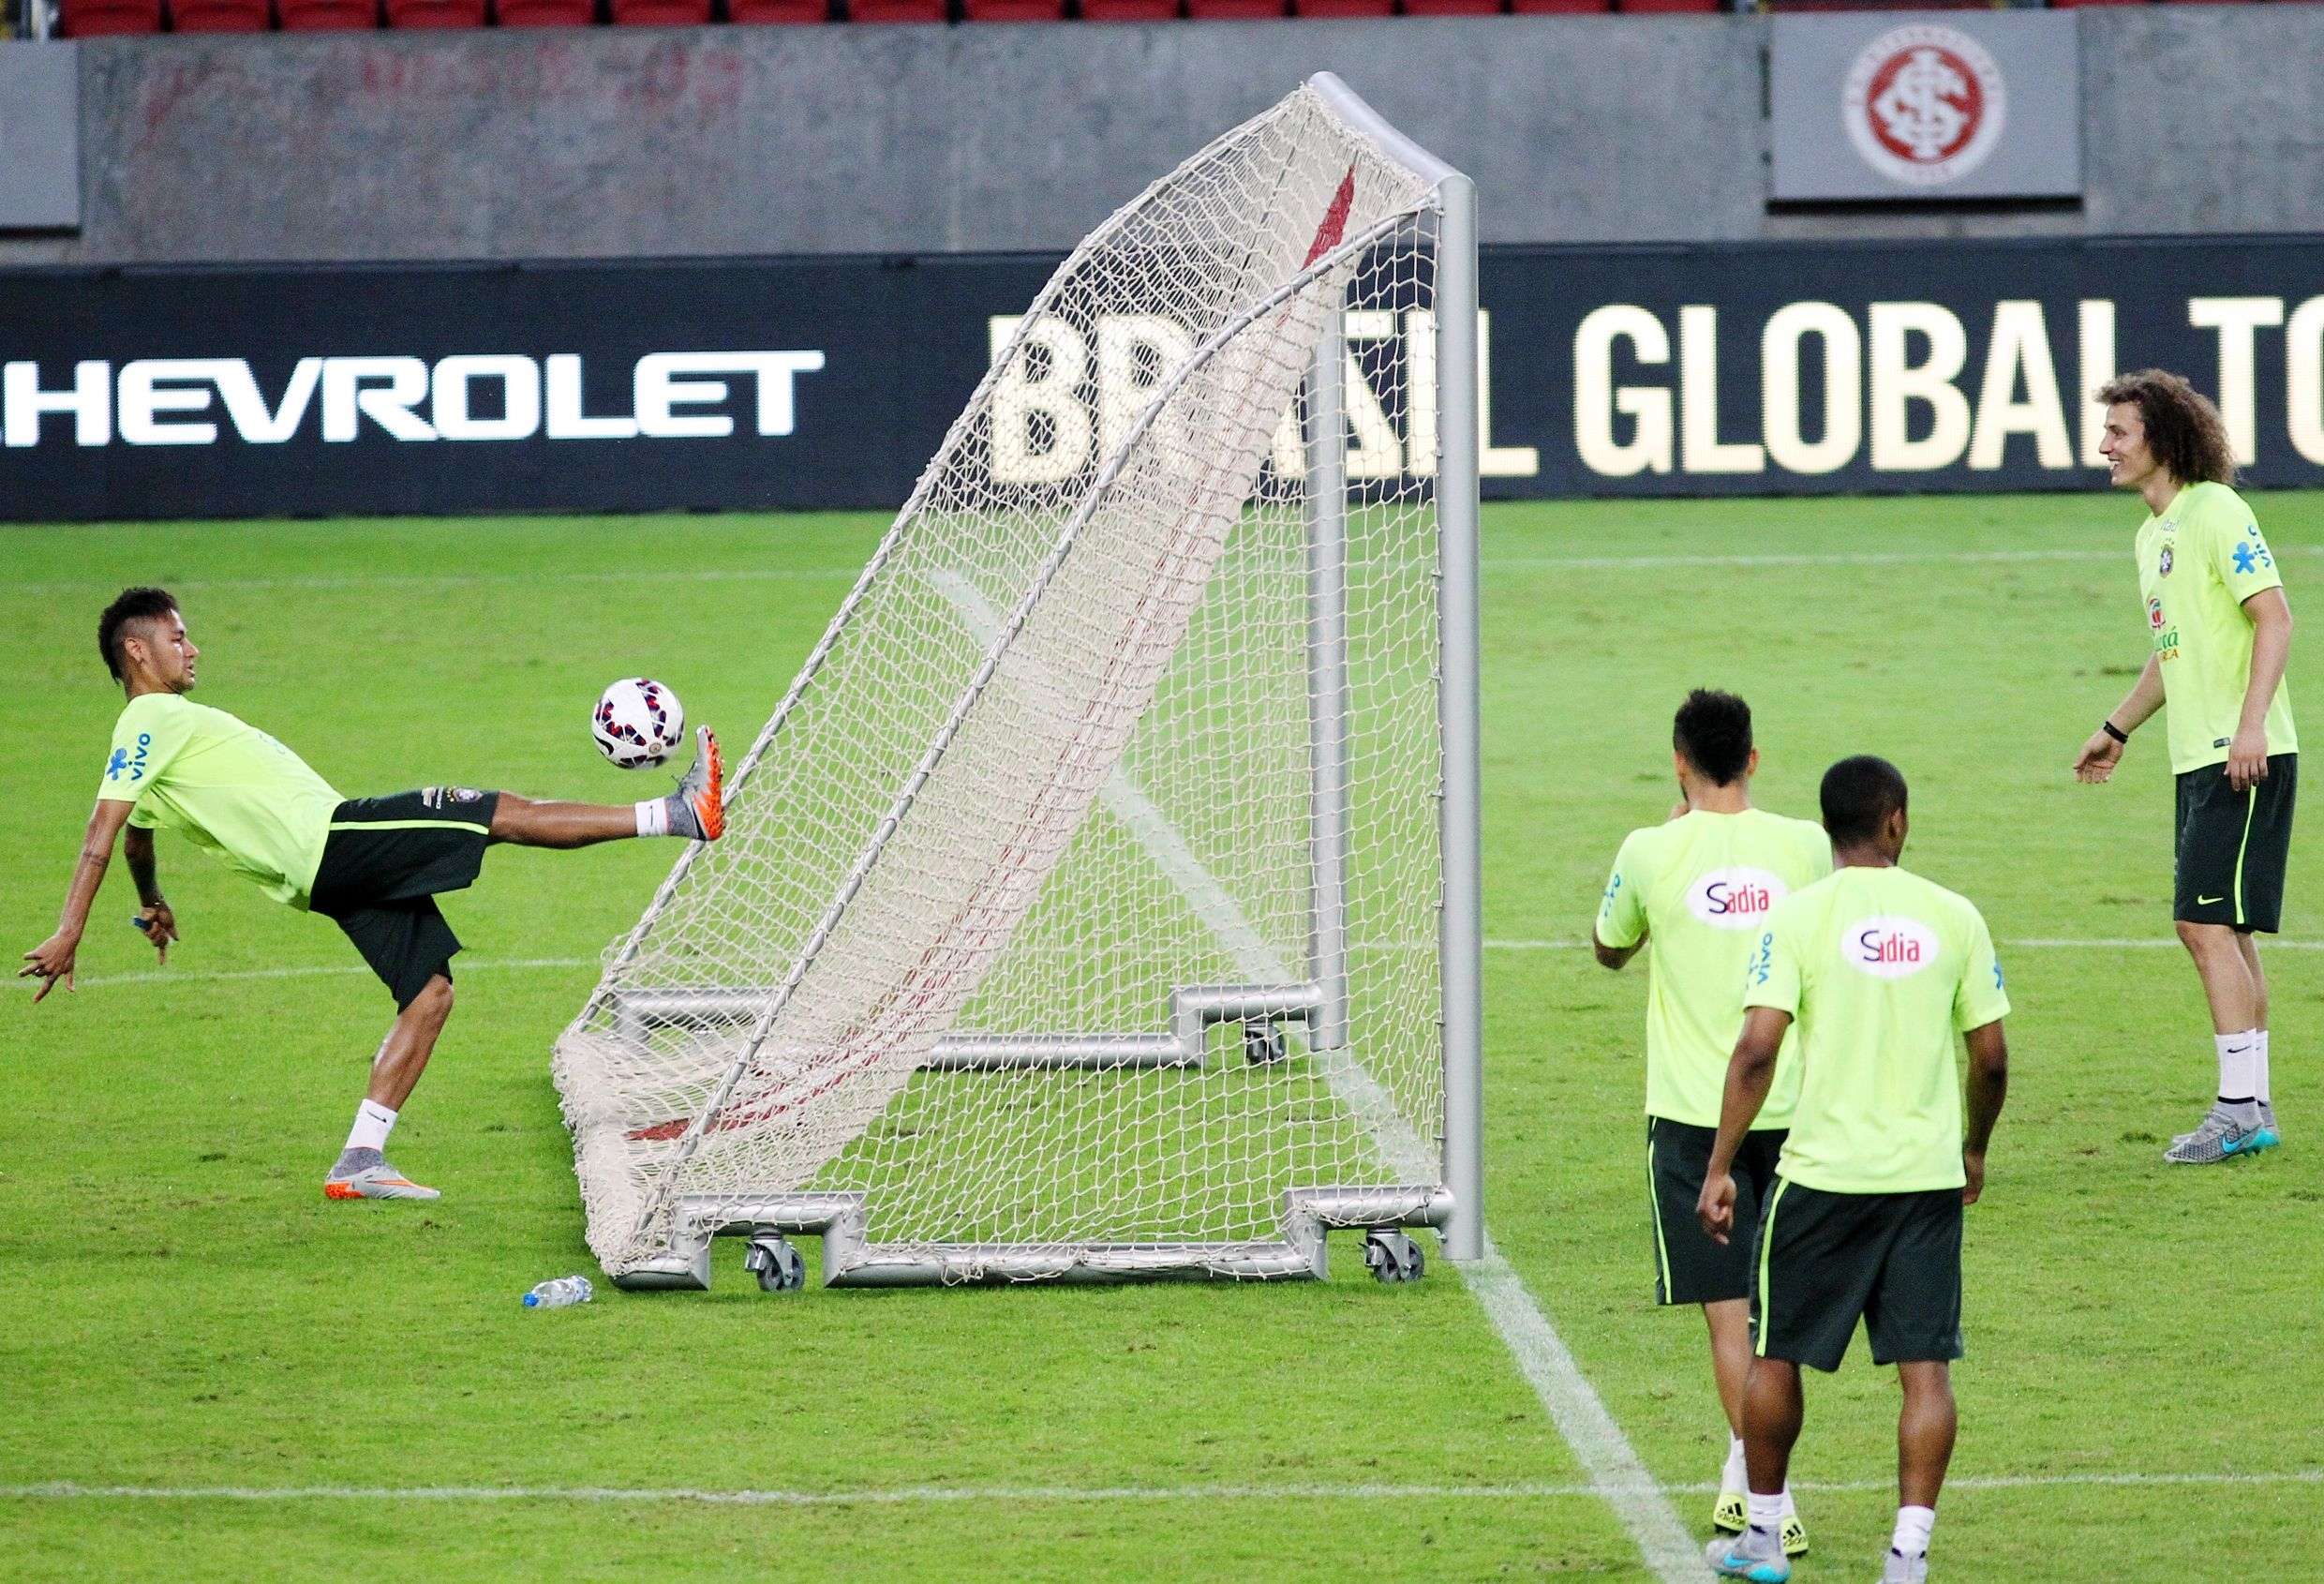 Neymar's goal from behind the fence is pure magic. (AP/Nabor Goulart)